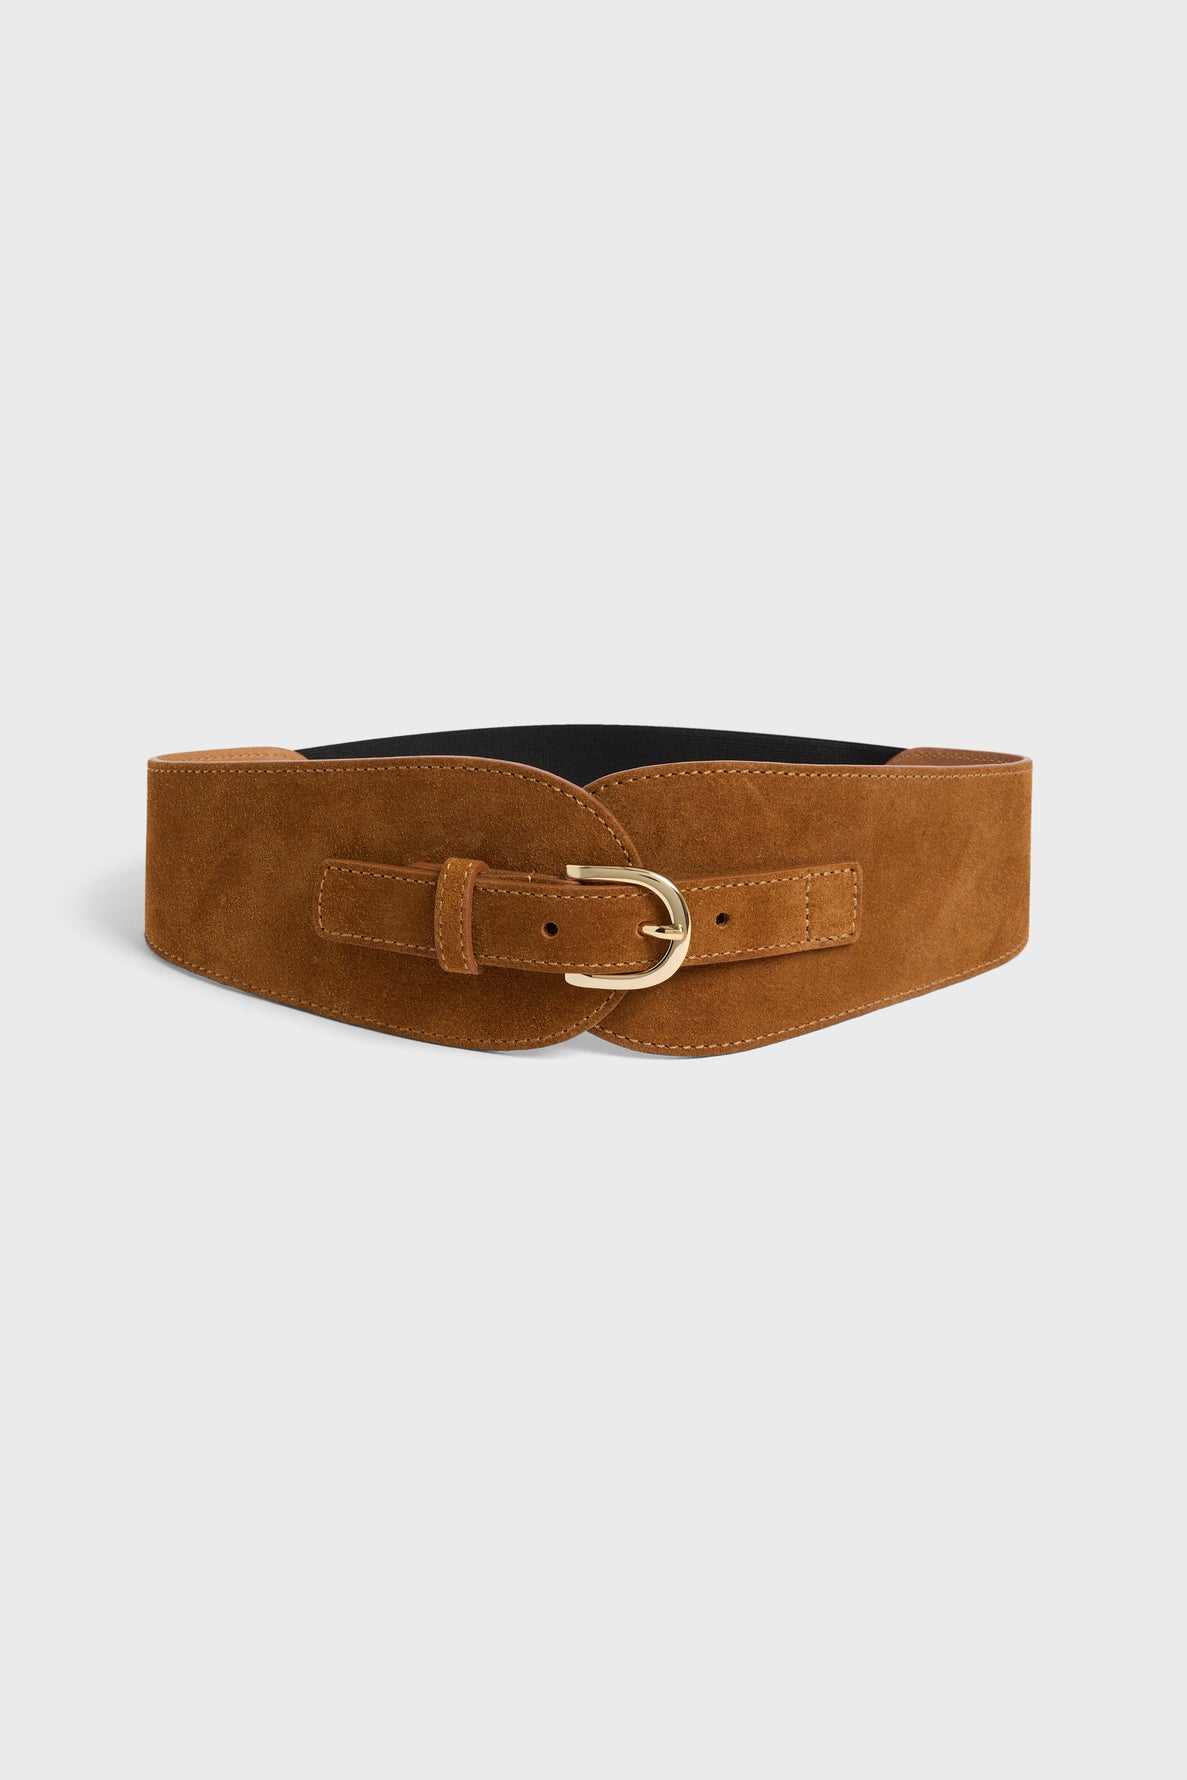 Suede leather corset belt - OLYMPE